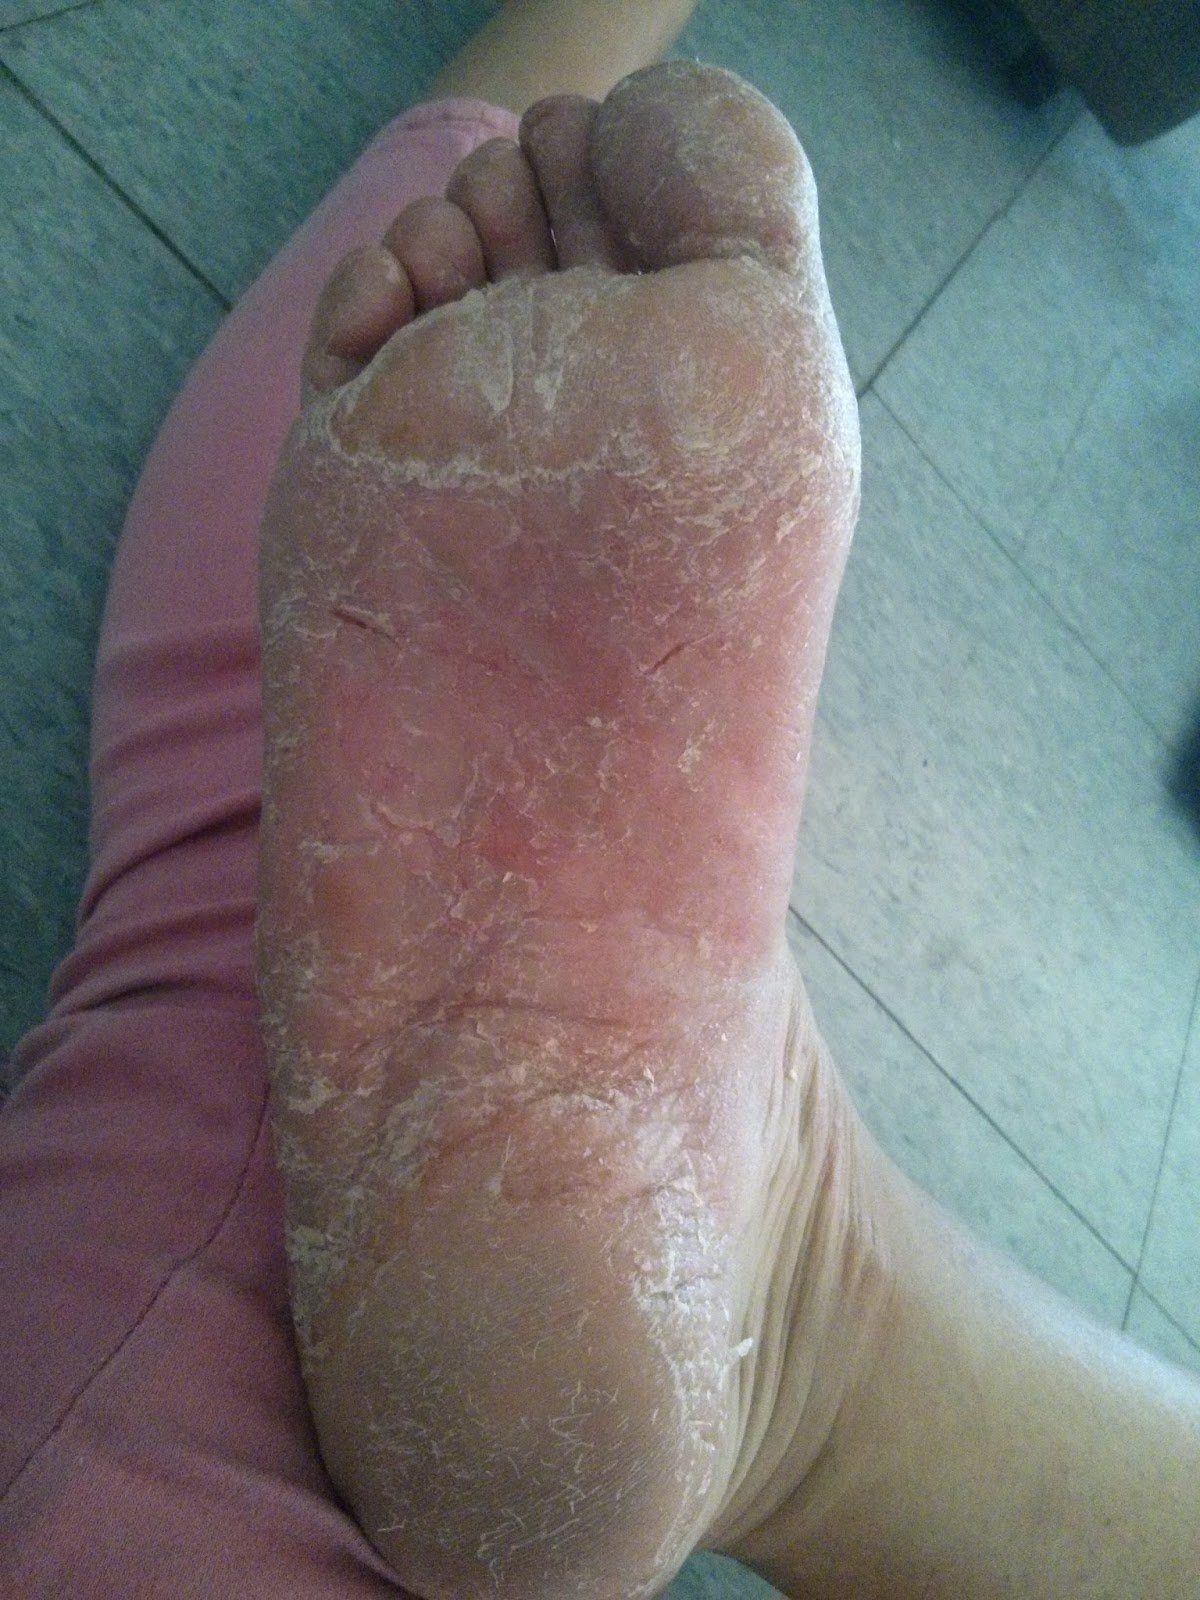 Living With Dyshidrosis/Pompholyx: Peeling badly, signs of third outbreak